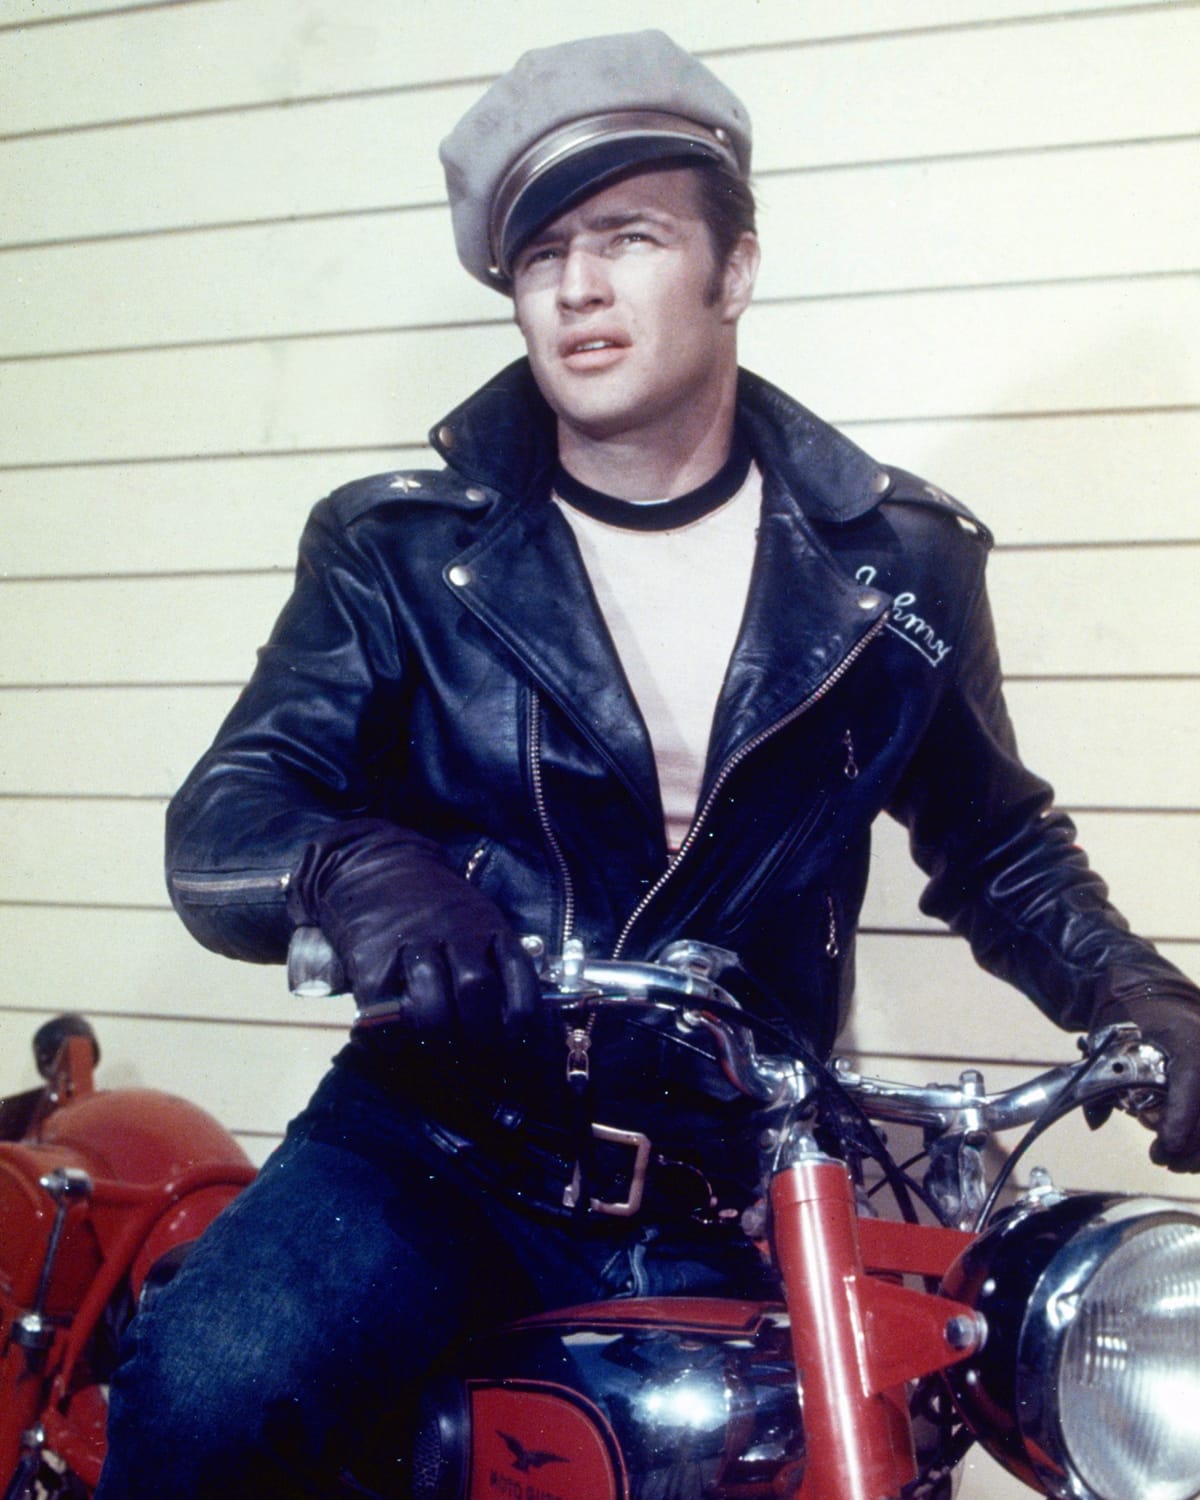 Marlon Brando wears a Perfecto-style motorcycle jacket and a tilted cap as Johnny Strabler in the 1953 American crime film The Wild One